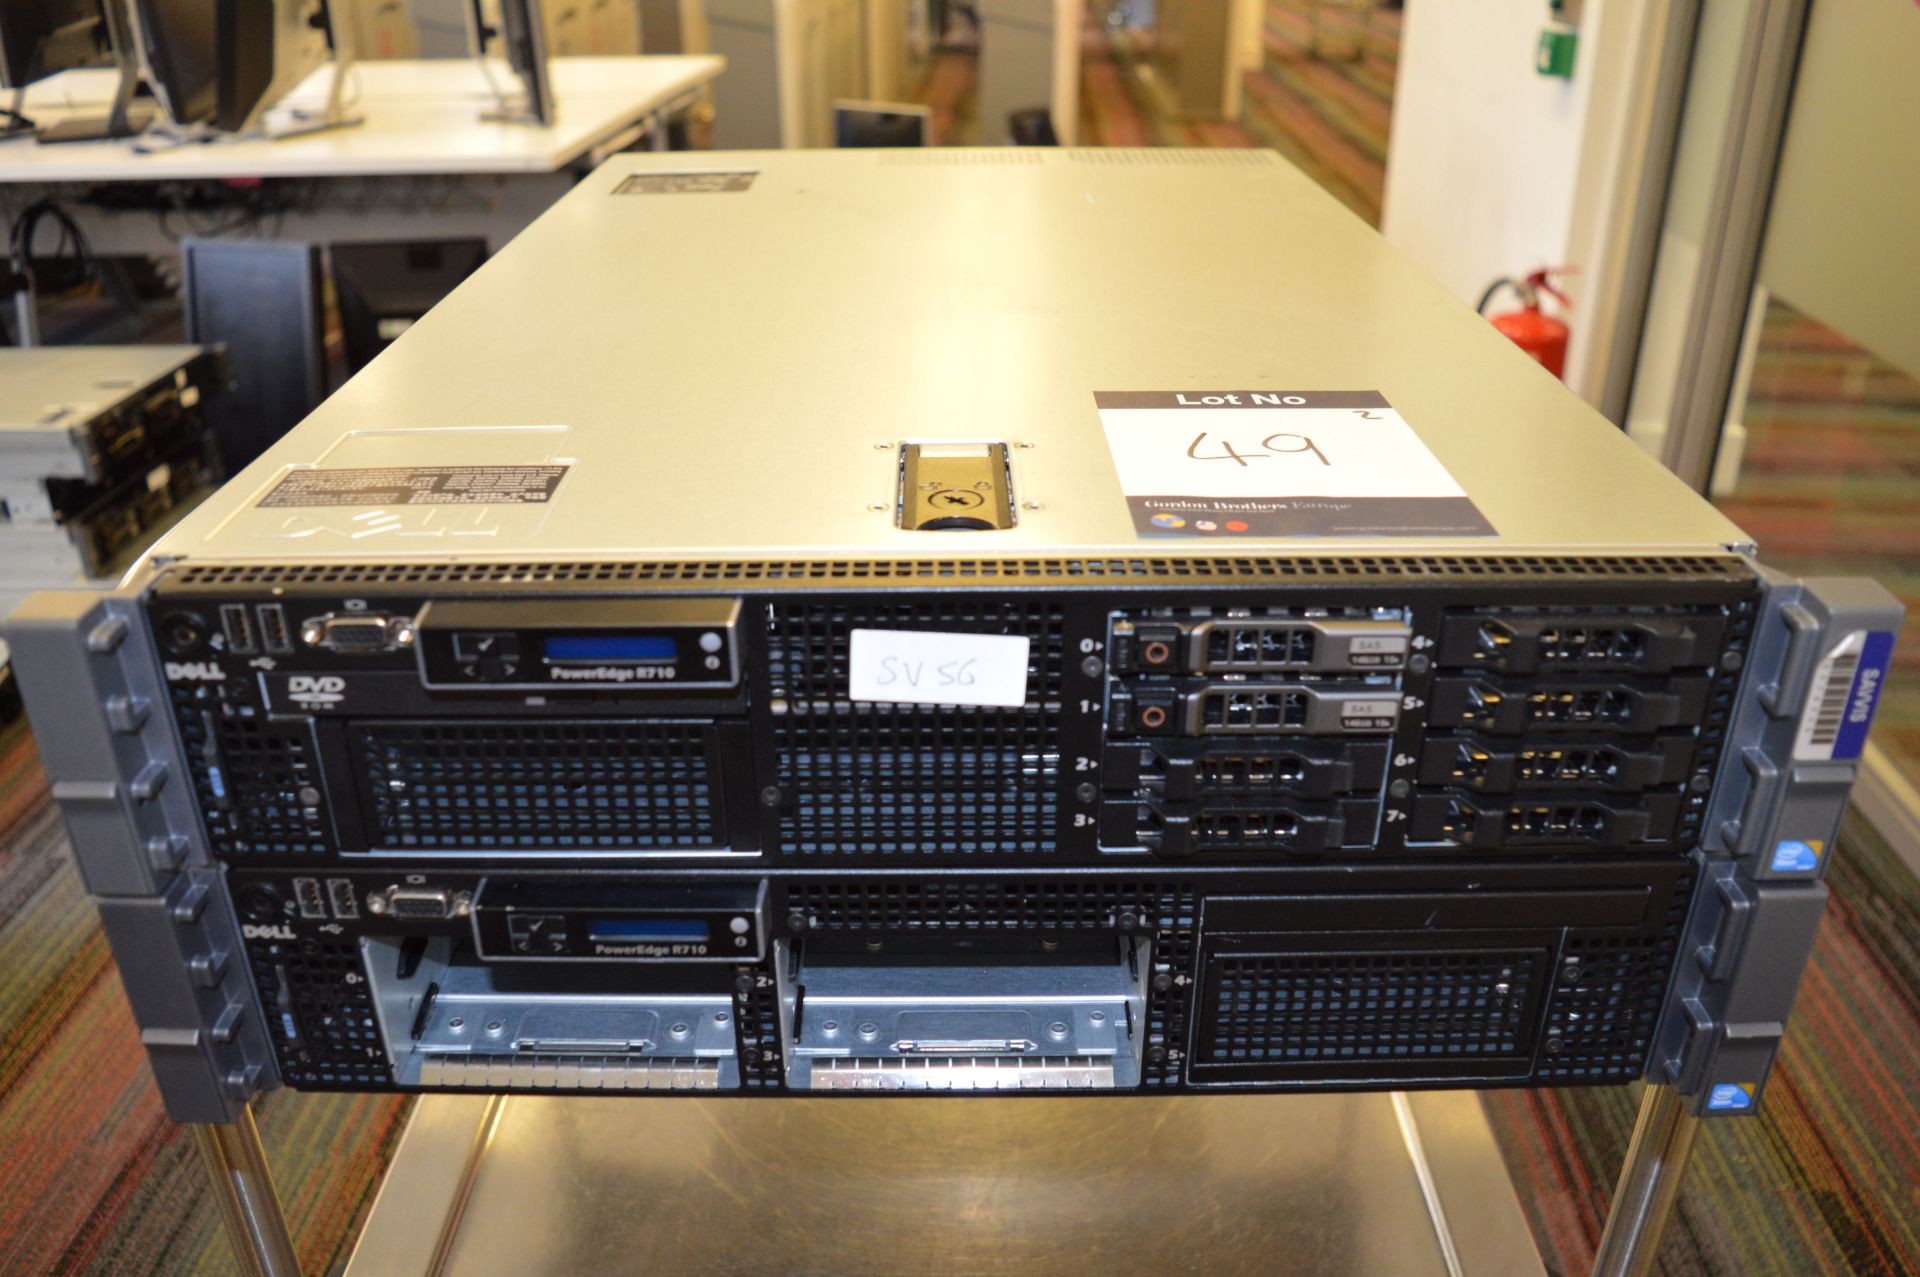 Dell Poweredge R710 no HDD Quad Core Xeon 5560 (working bu no hard drives or RAM) and Dell Poweredge